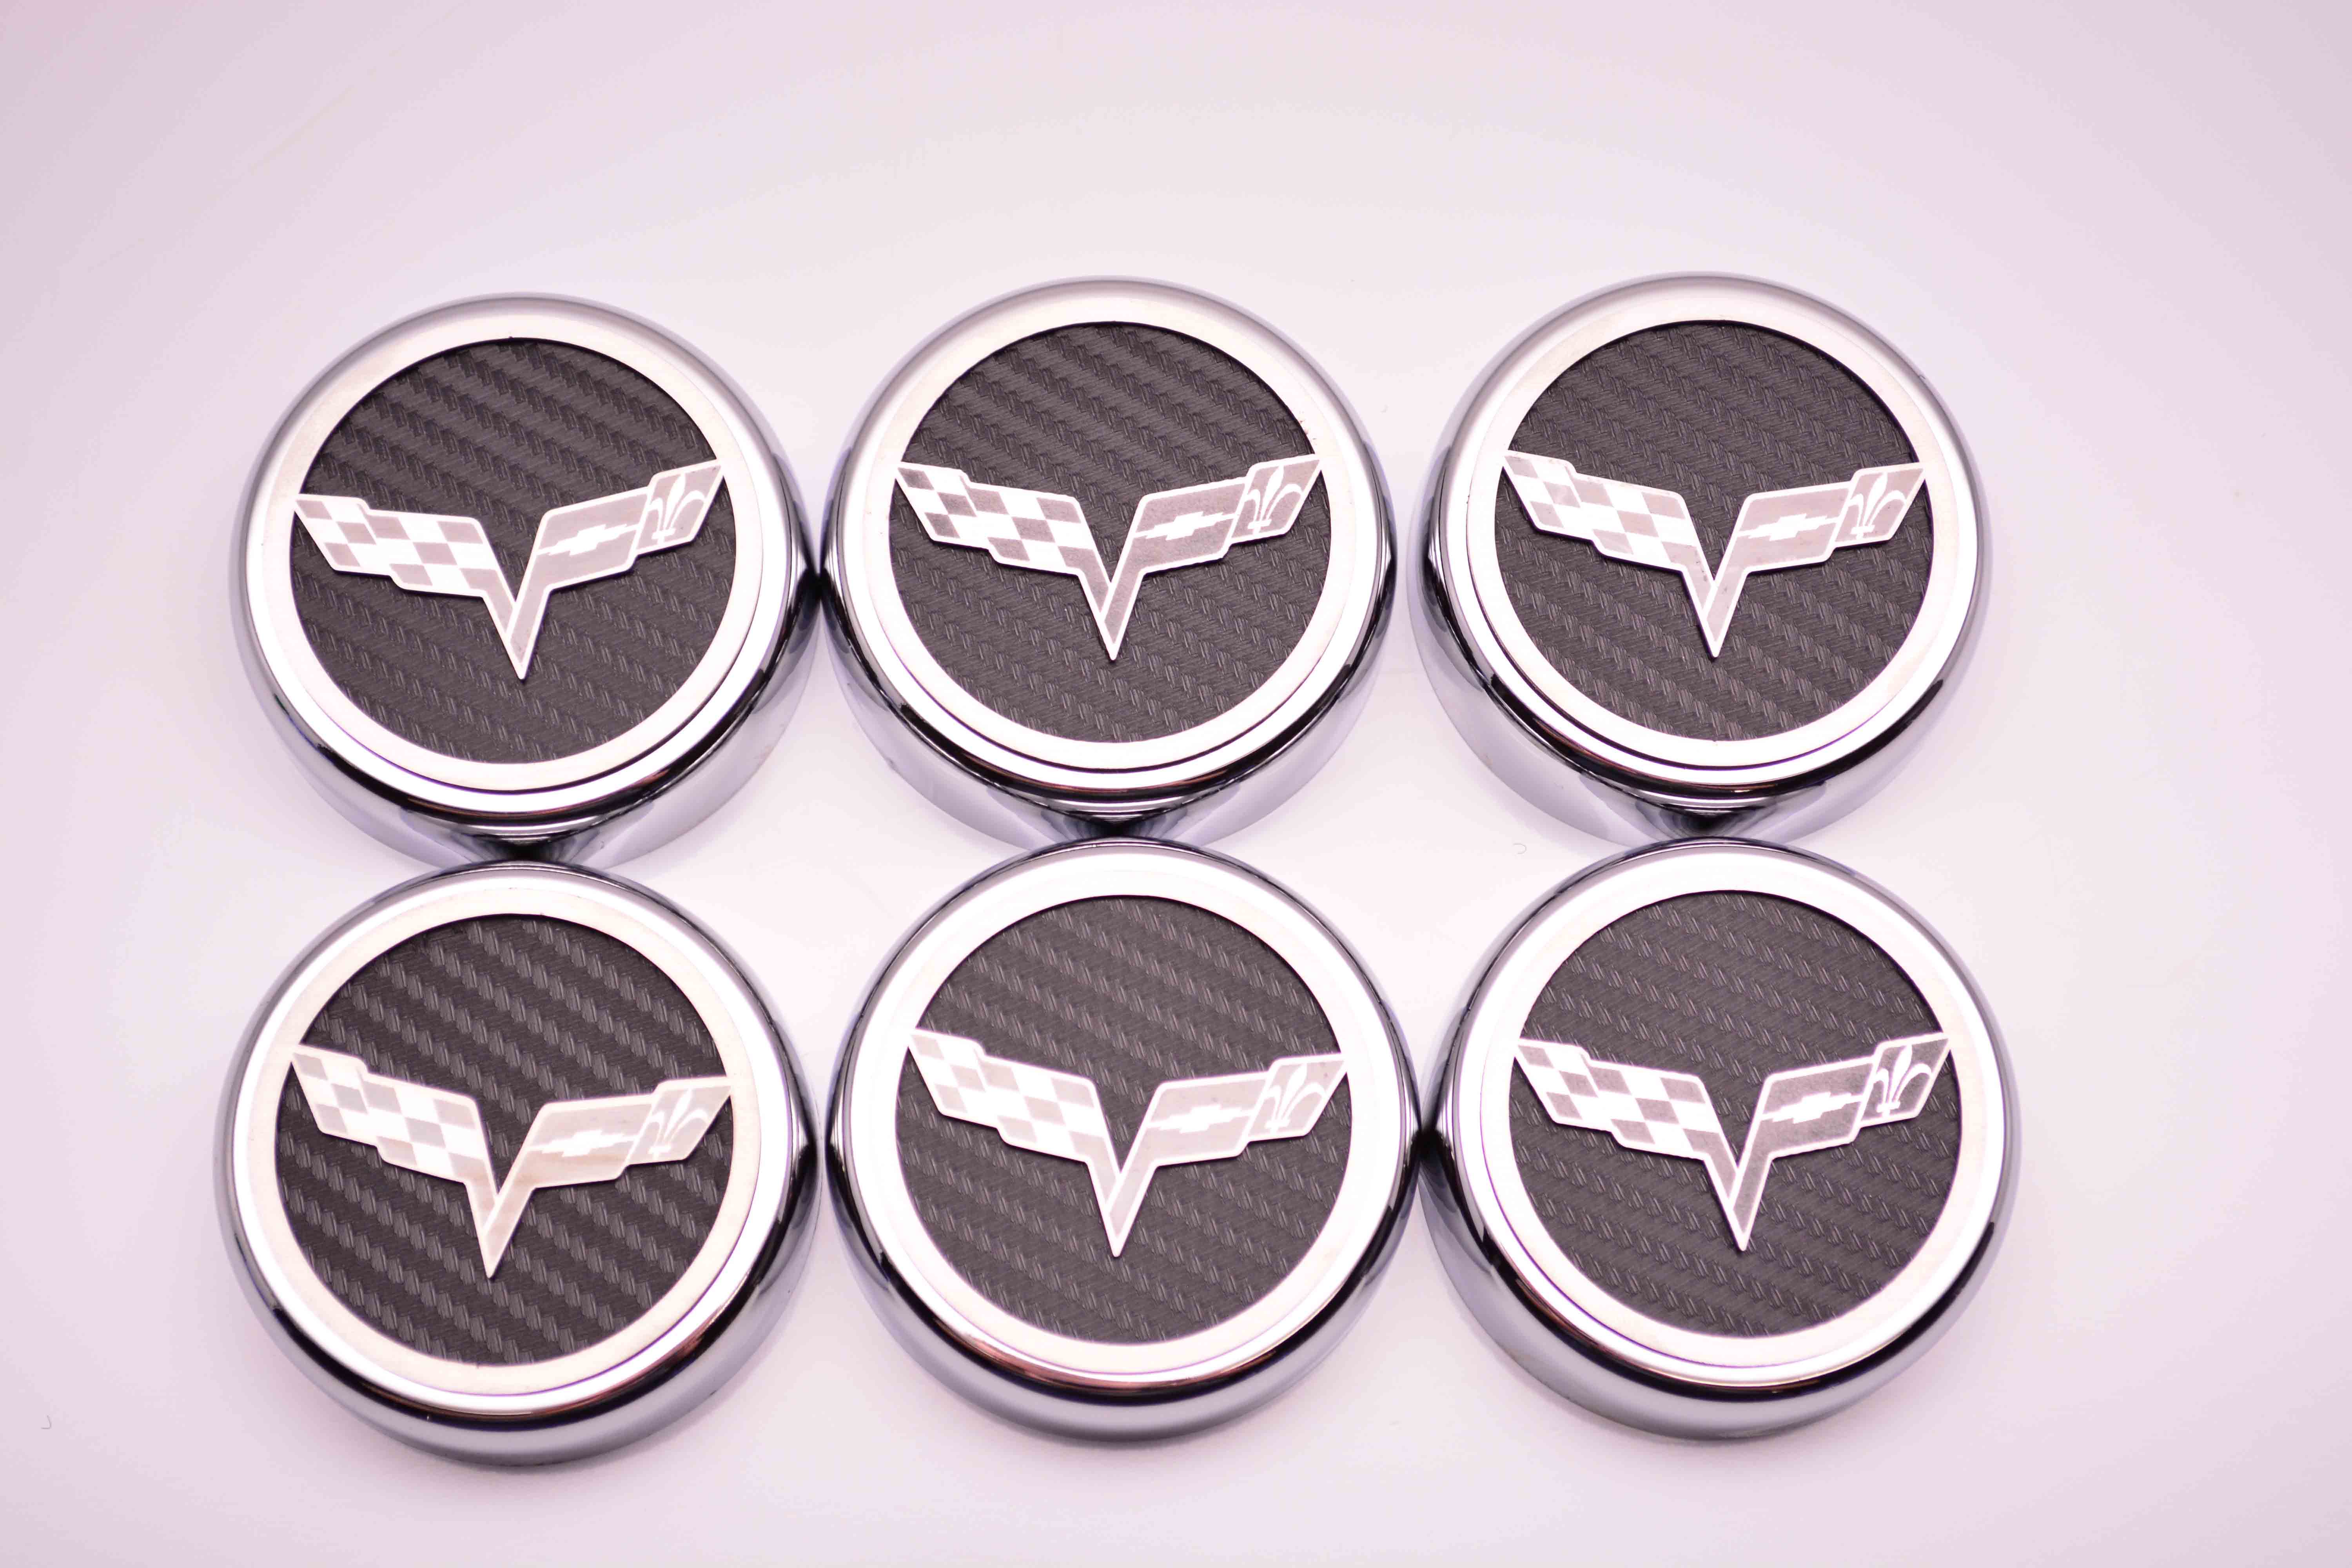 2005-2008 C6 Corvette, Cap Cover Set Crossed Flags 6pc Manual, White, Stainless Steel